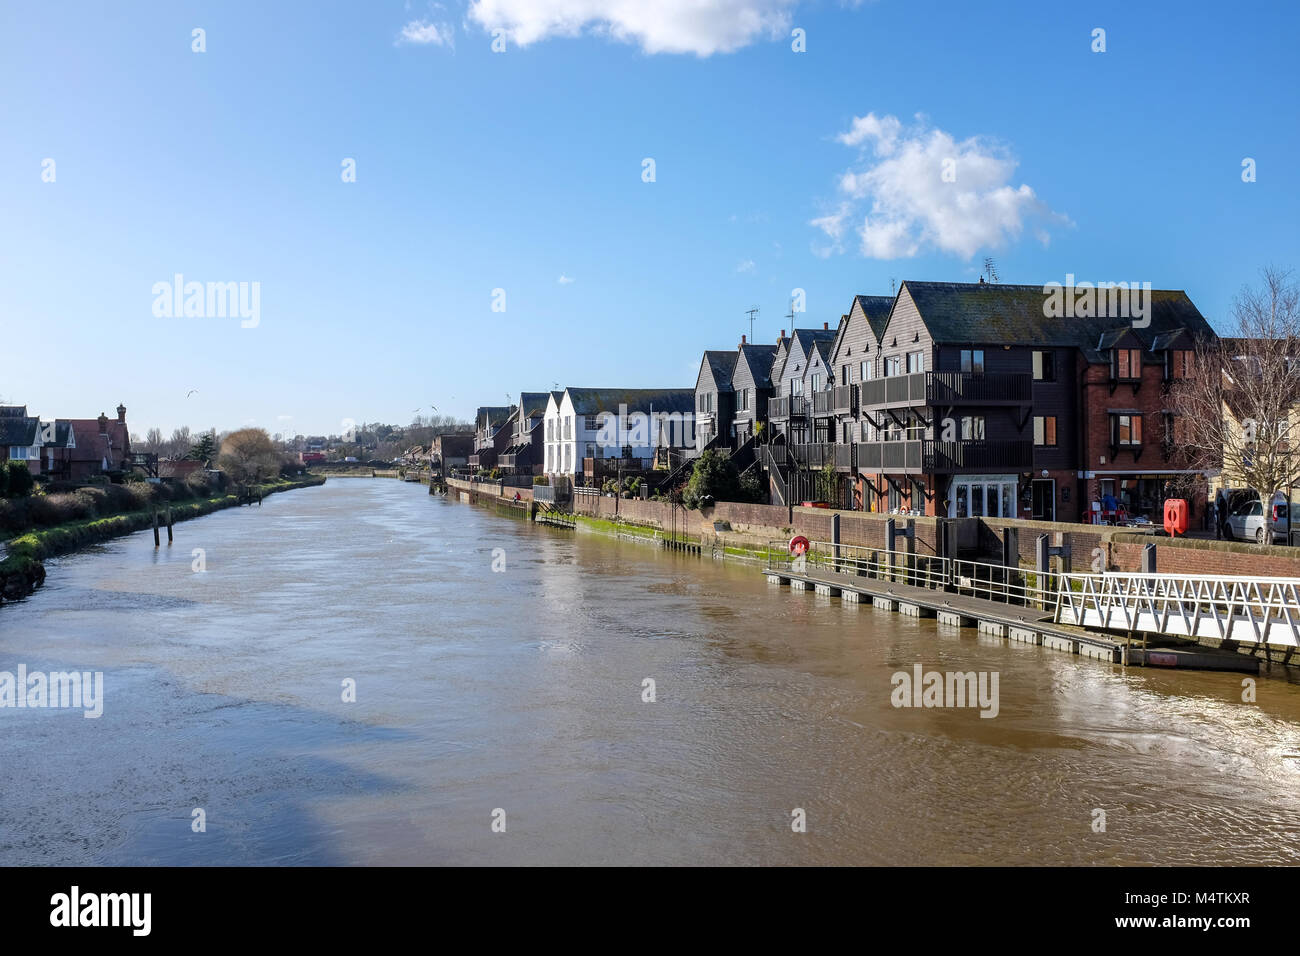 Arundel West Sussex UK February 2018 - Houses and flats overlooking the River Arun at High tide where there has been problems with flooding Stock Photo